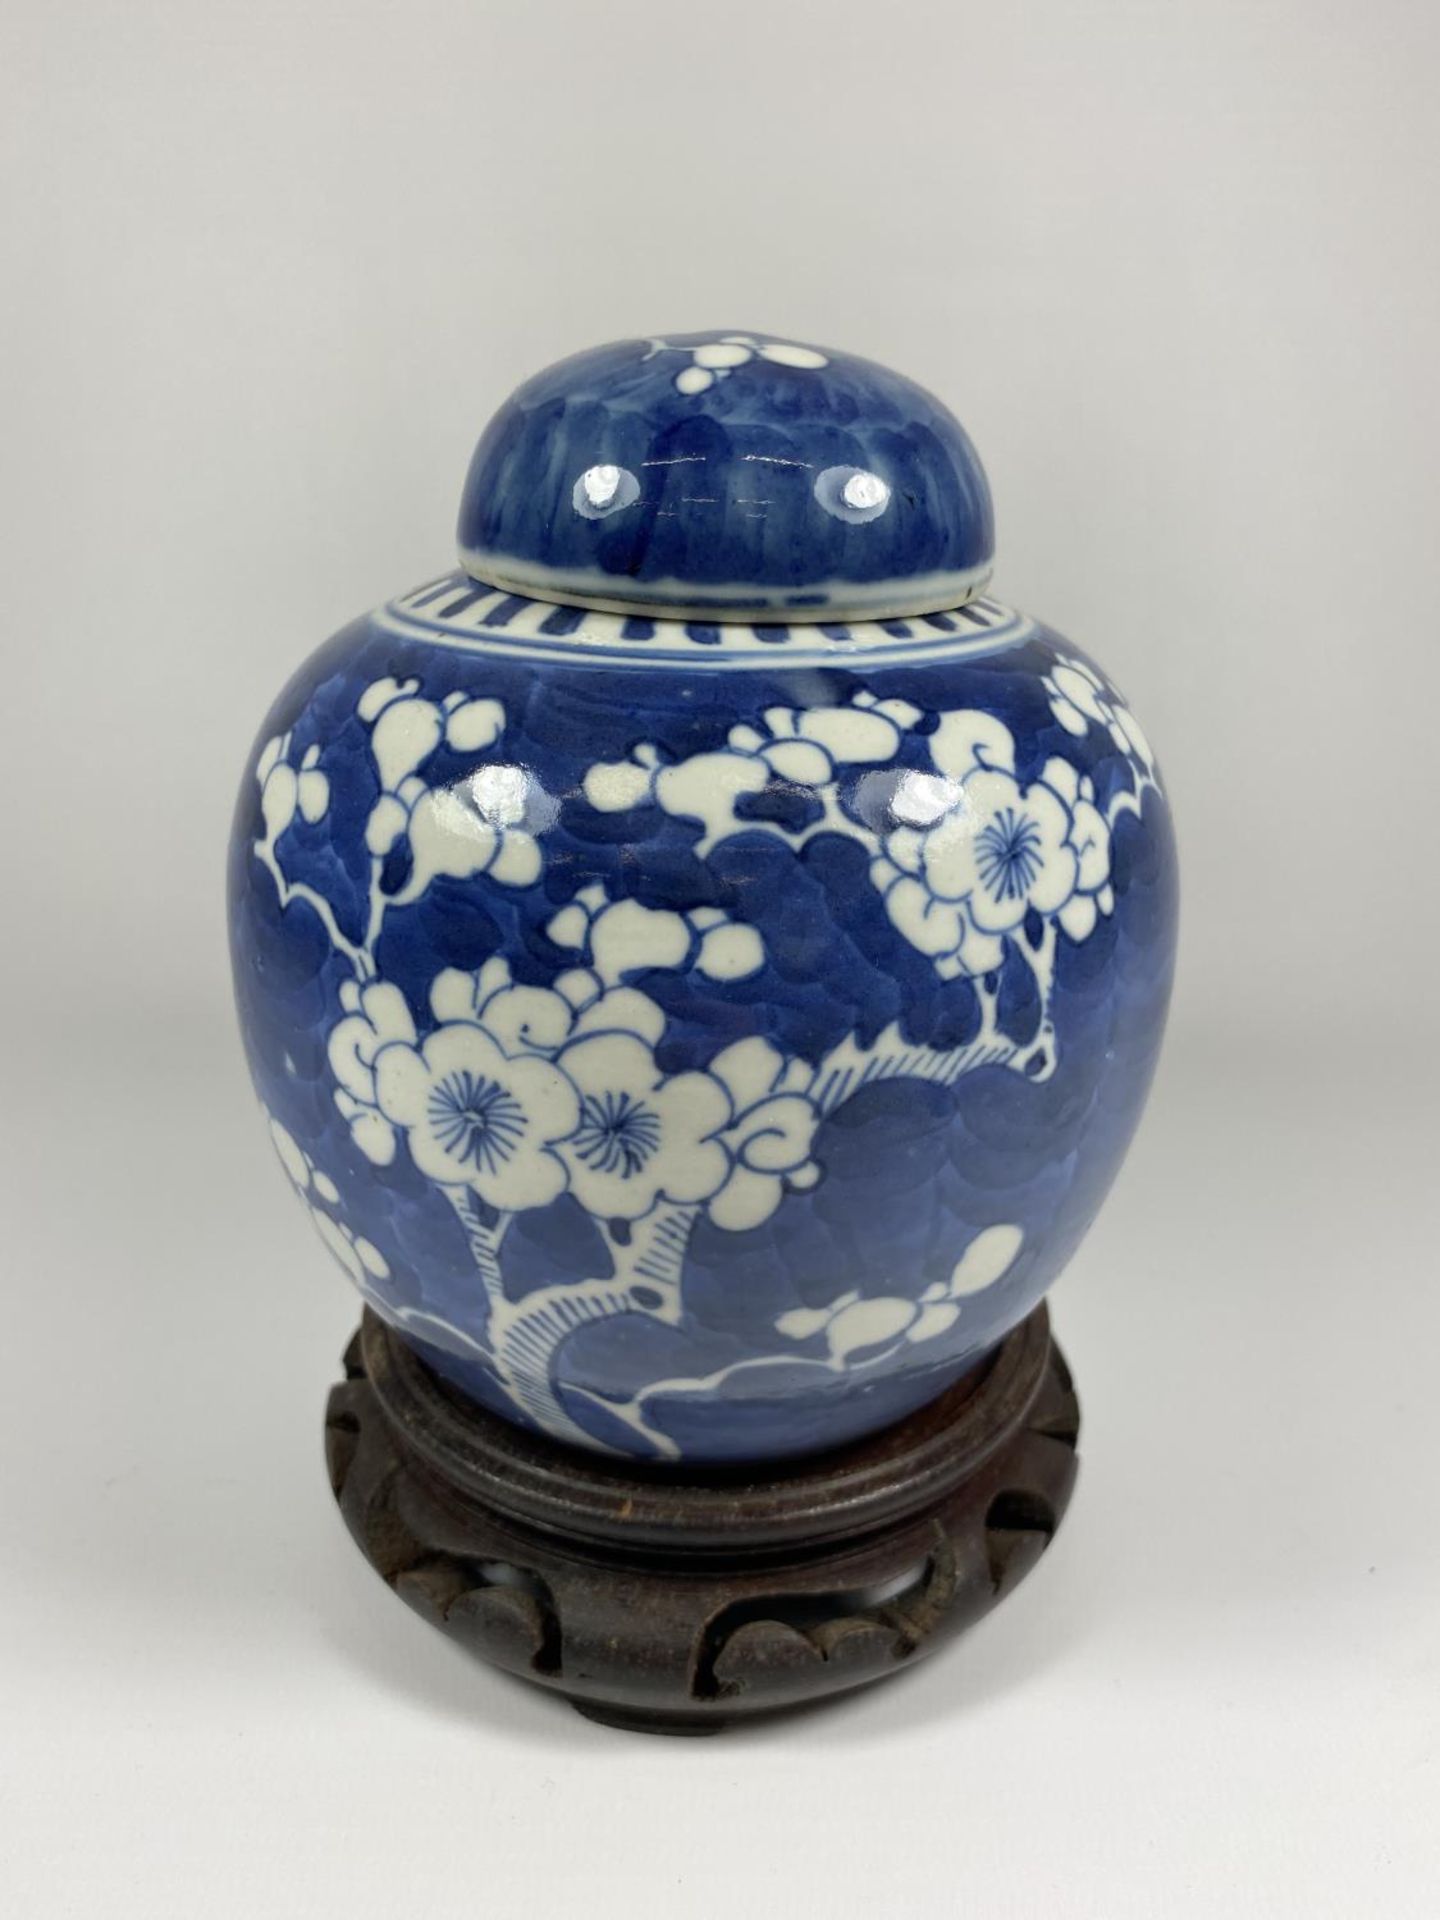 A LATE 19TH CENTURY CHINESE PORCELAIN PRUNUS BLOSSOM PATTERN GINGER JAR ON WOODEN BASE, DOUBLE